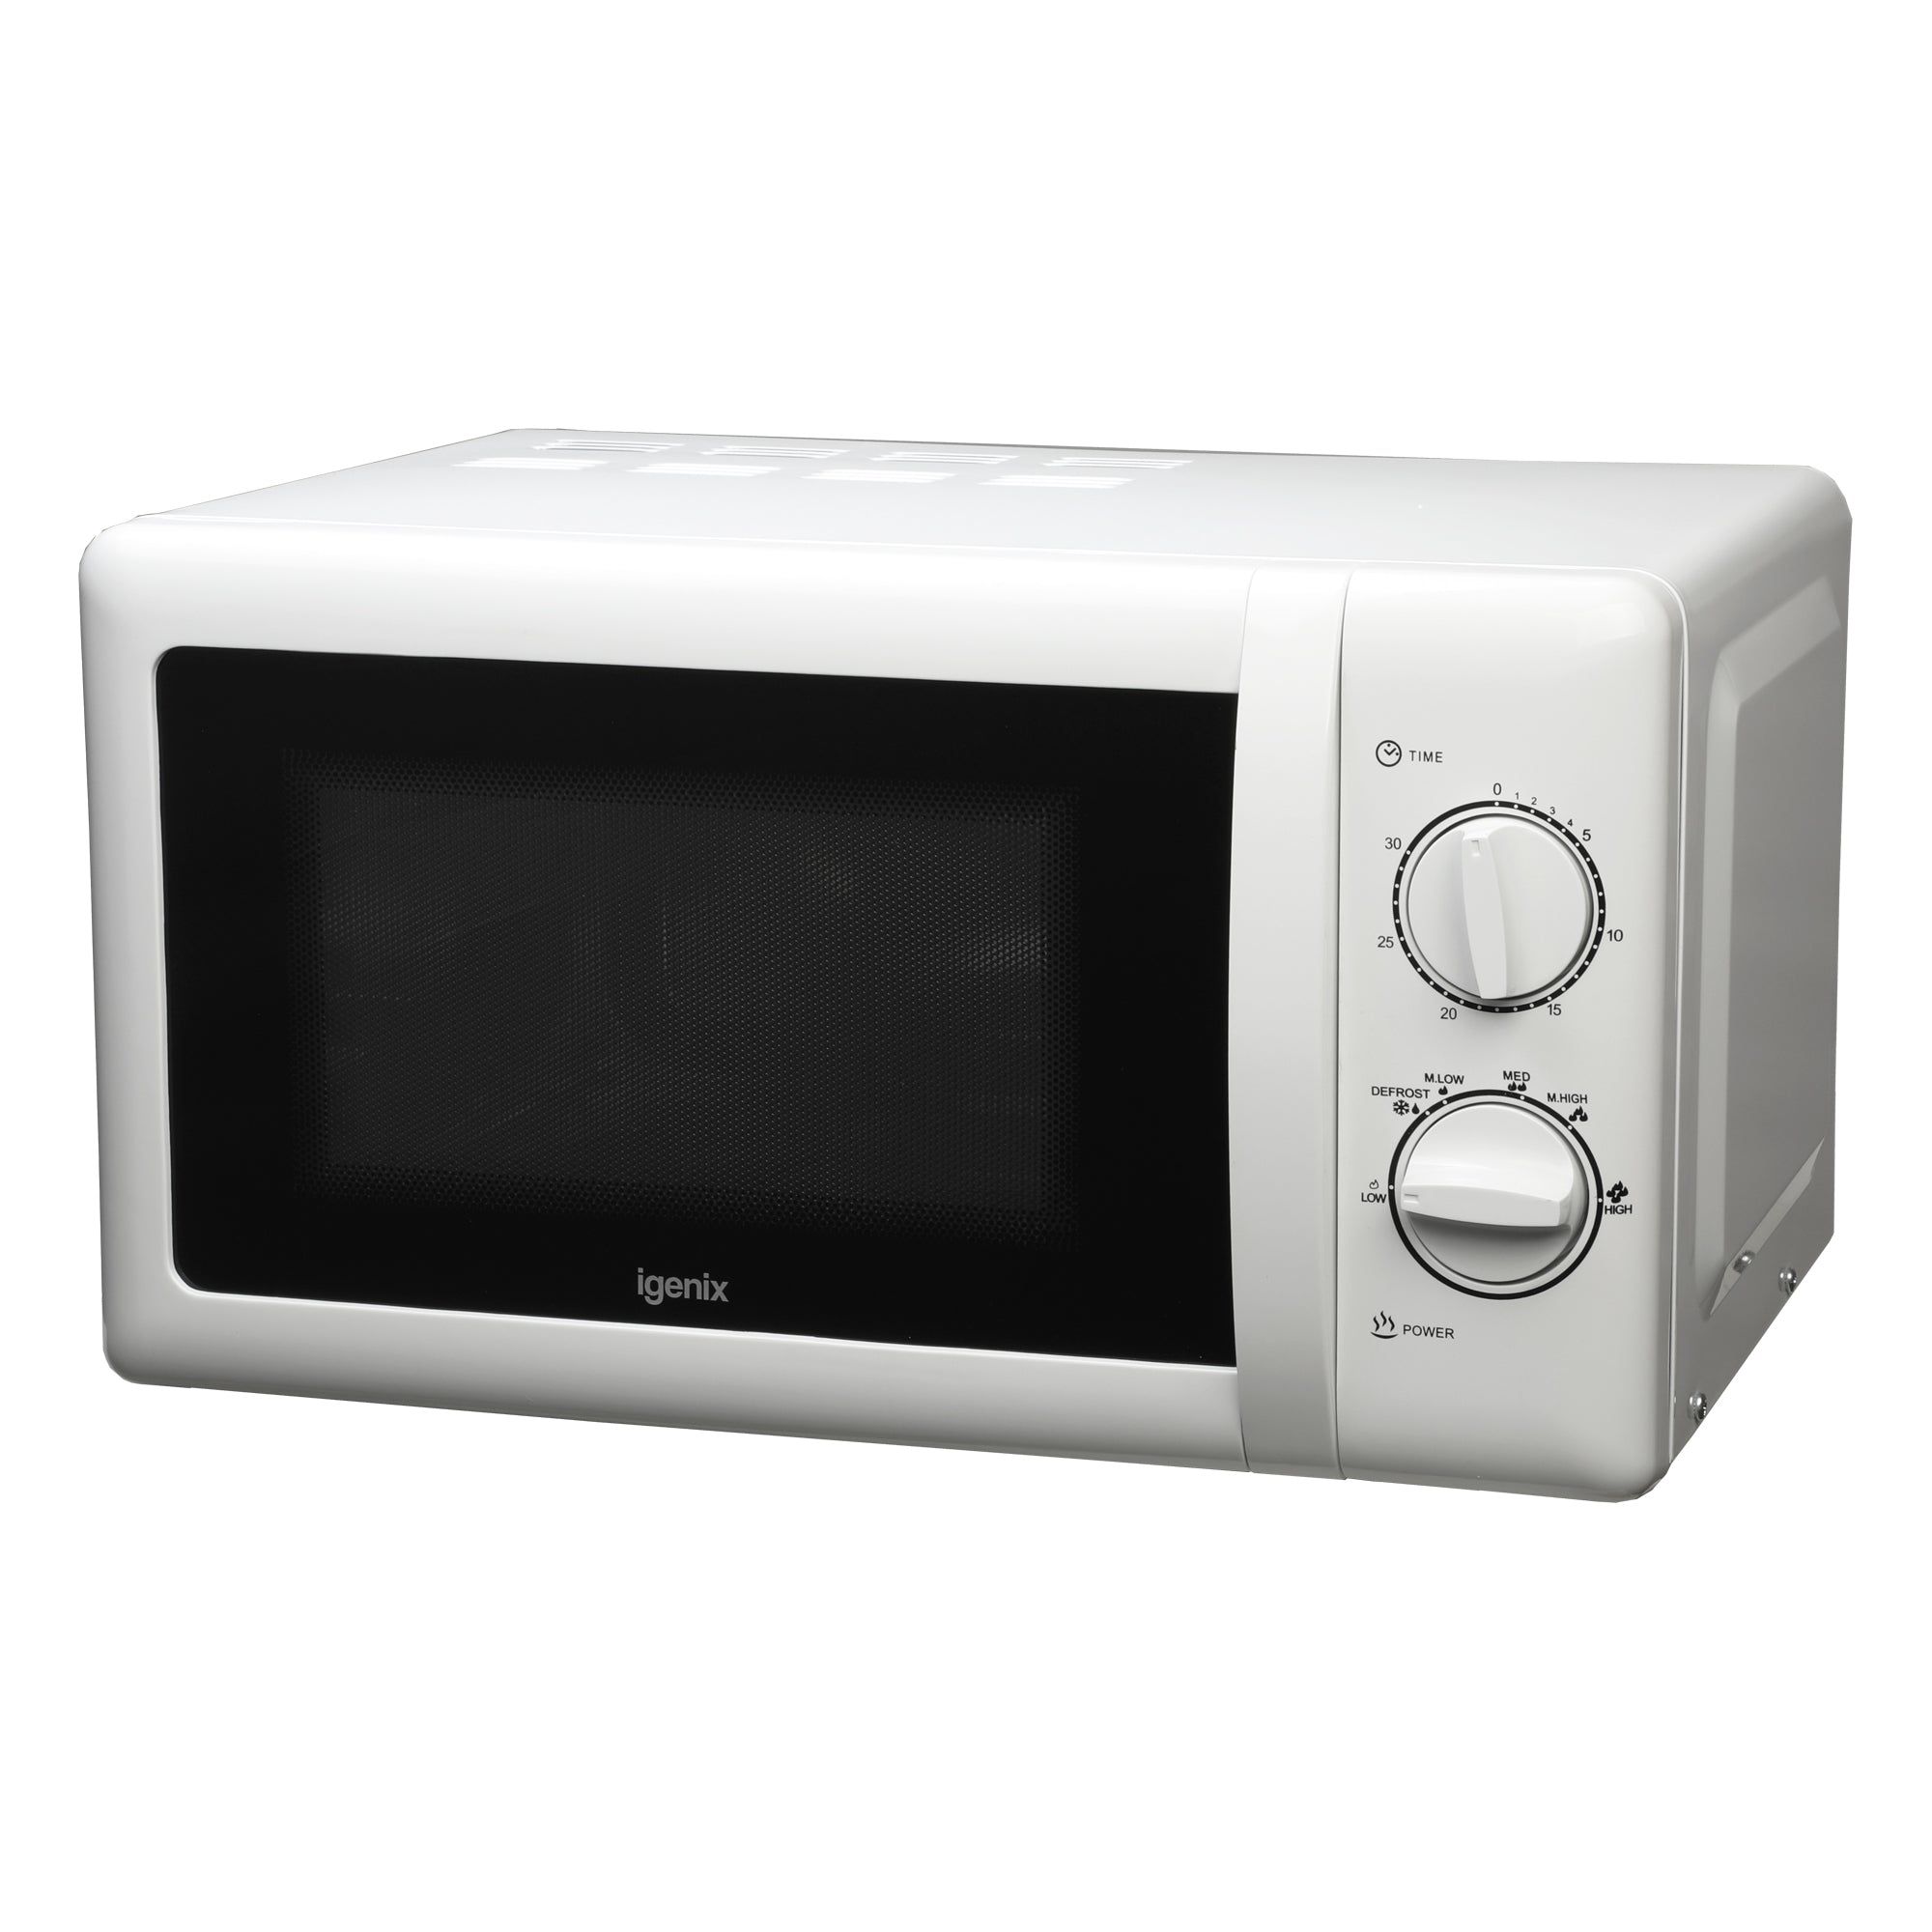 Manual Microwave, 20 Litre, Easy Clean Interior, 700W, White